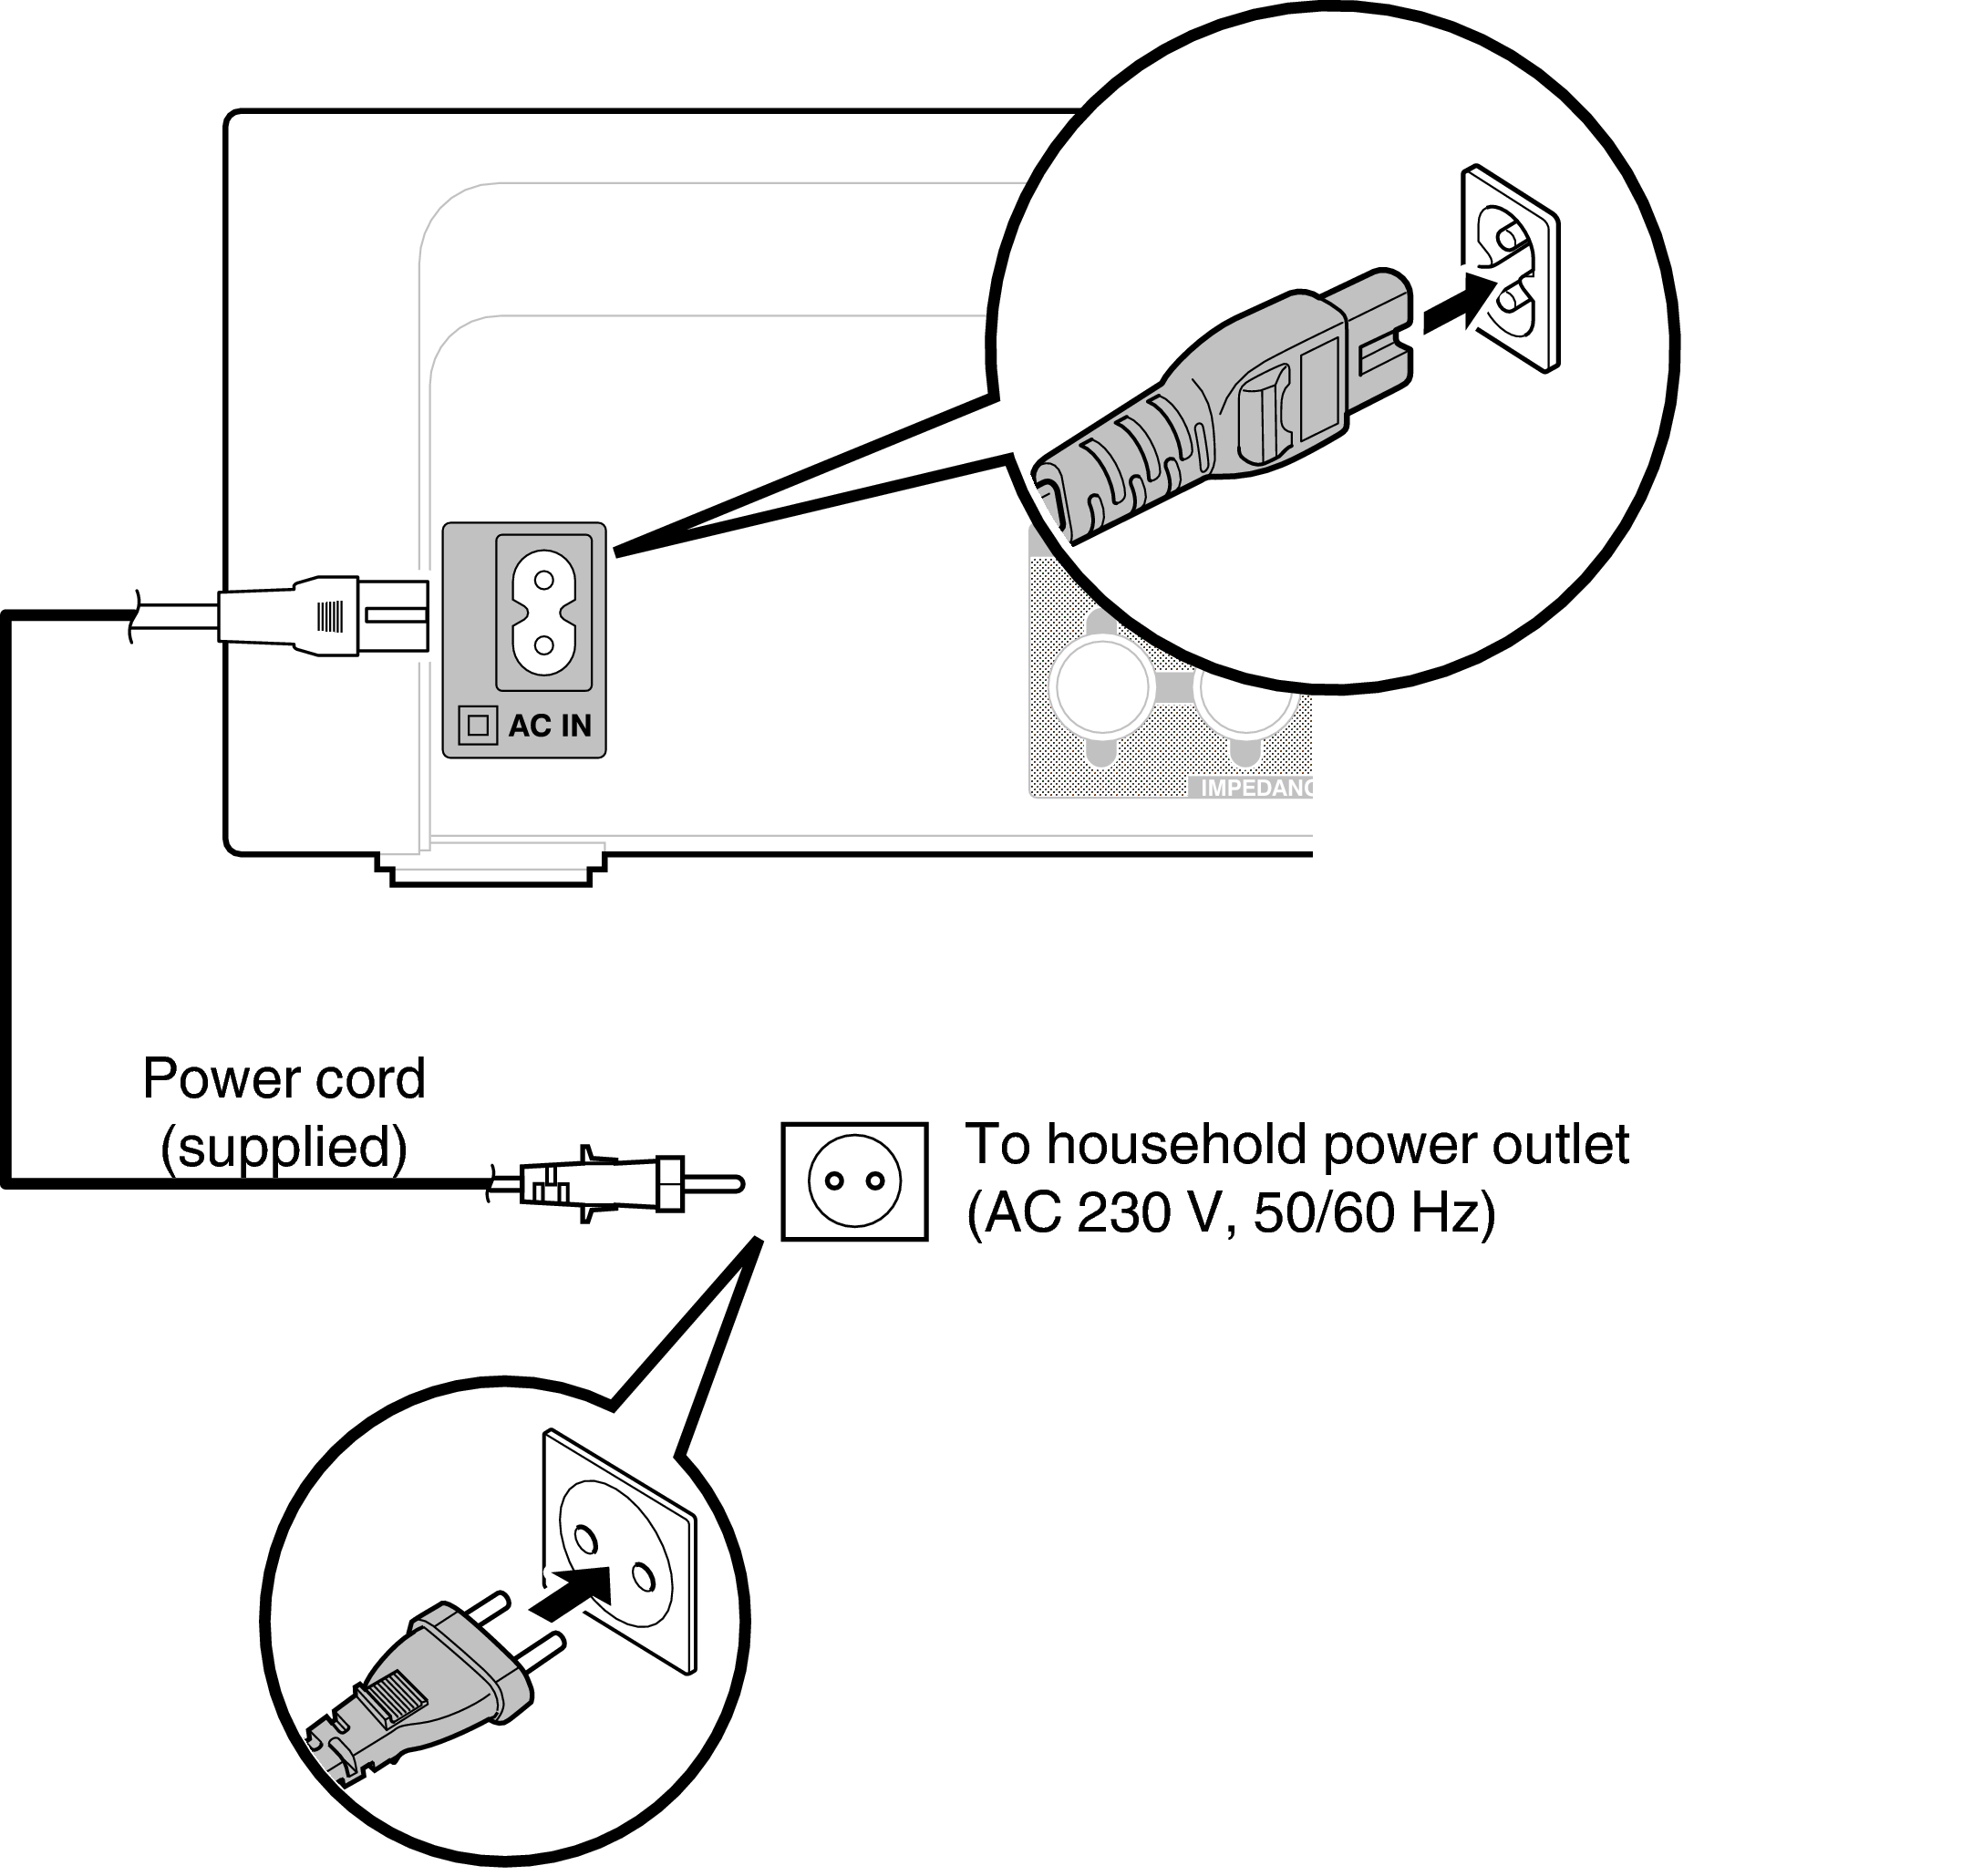 Connecting the power cord RCD-N9